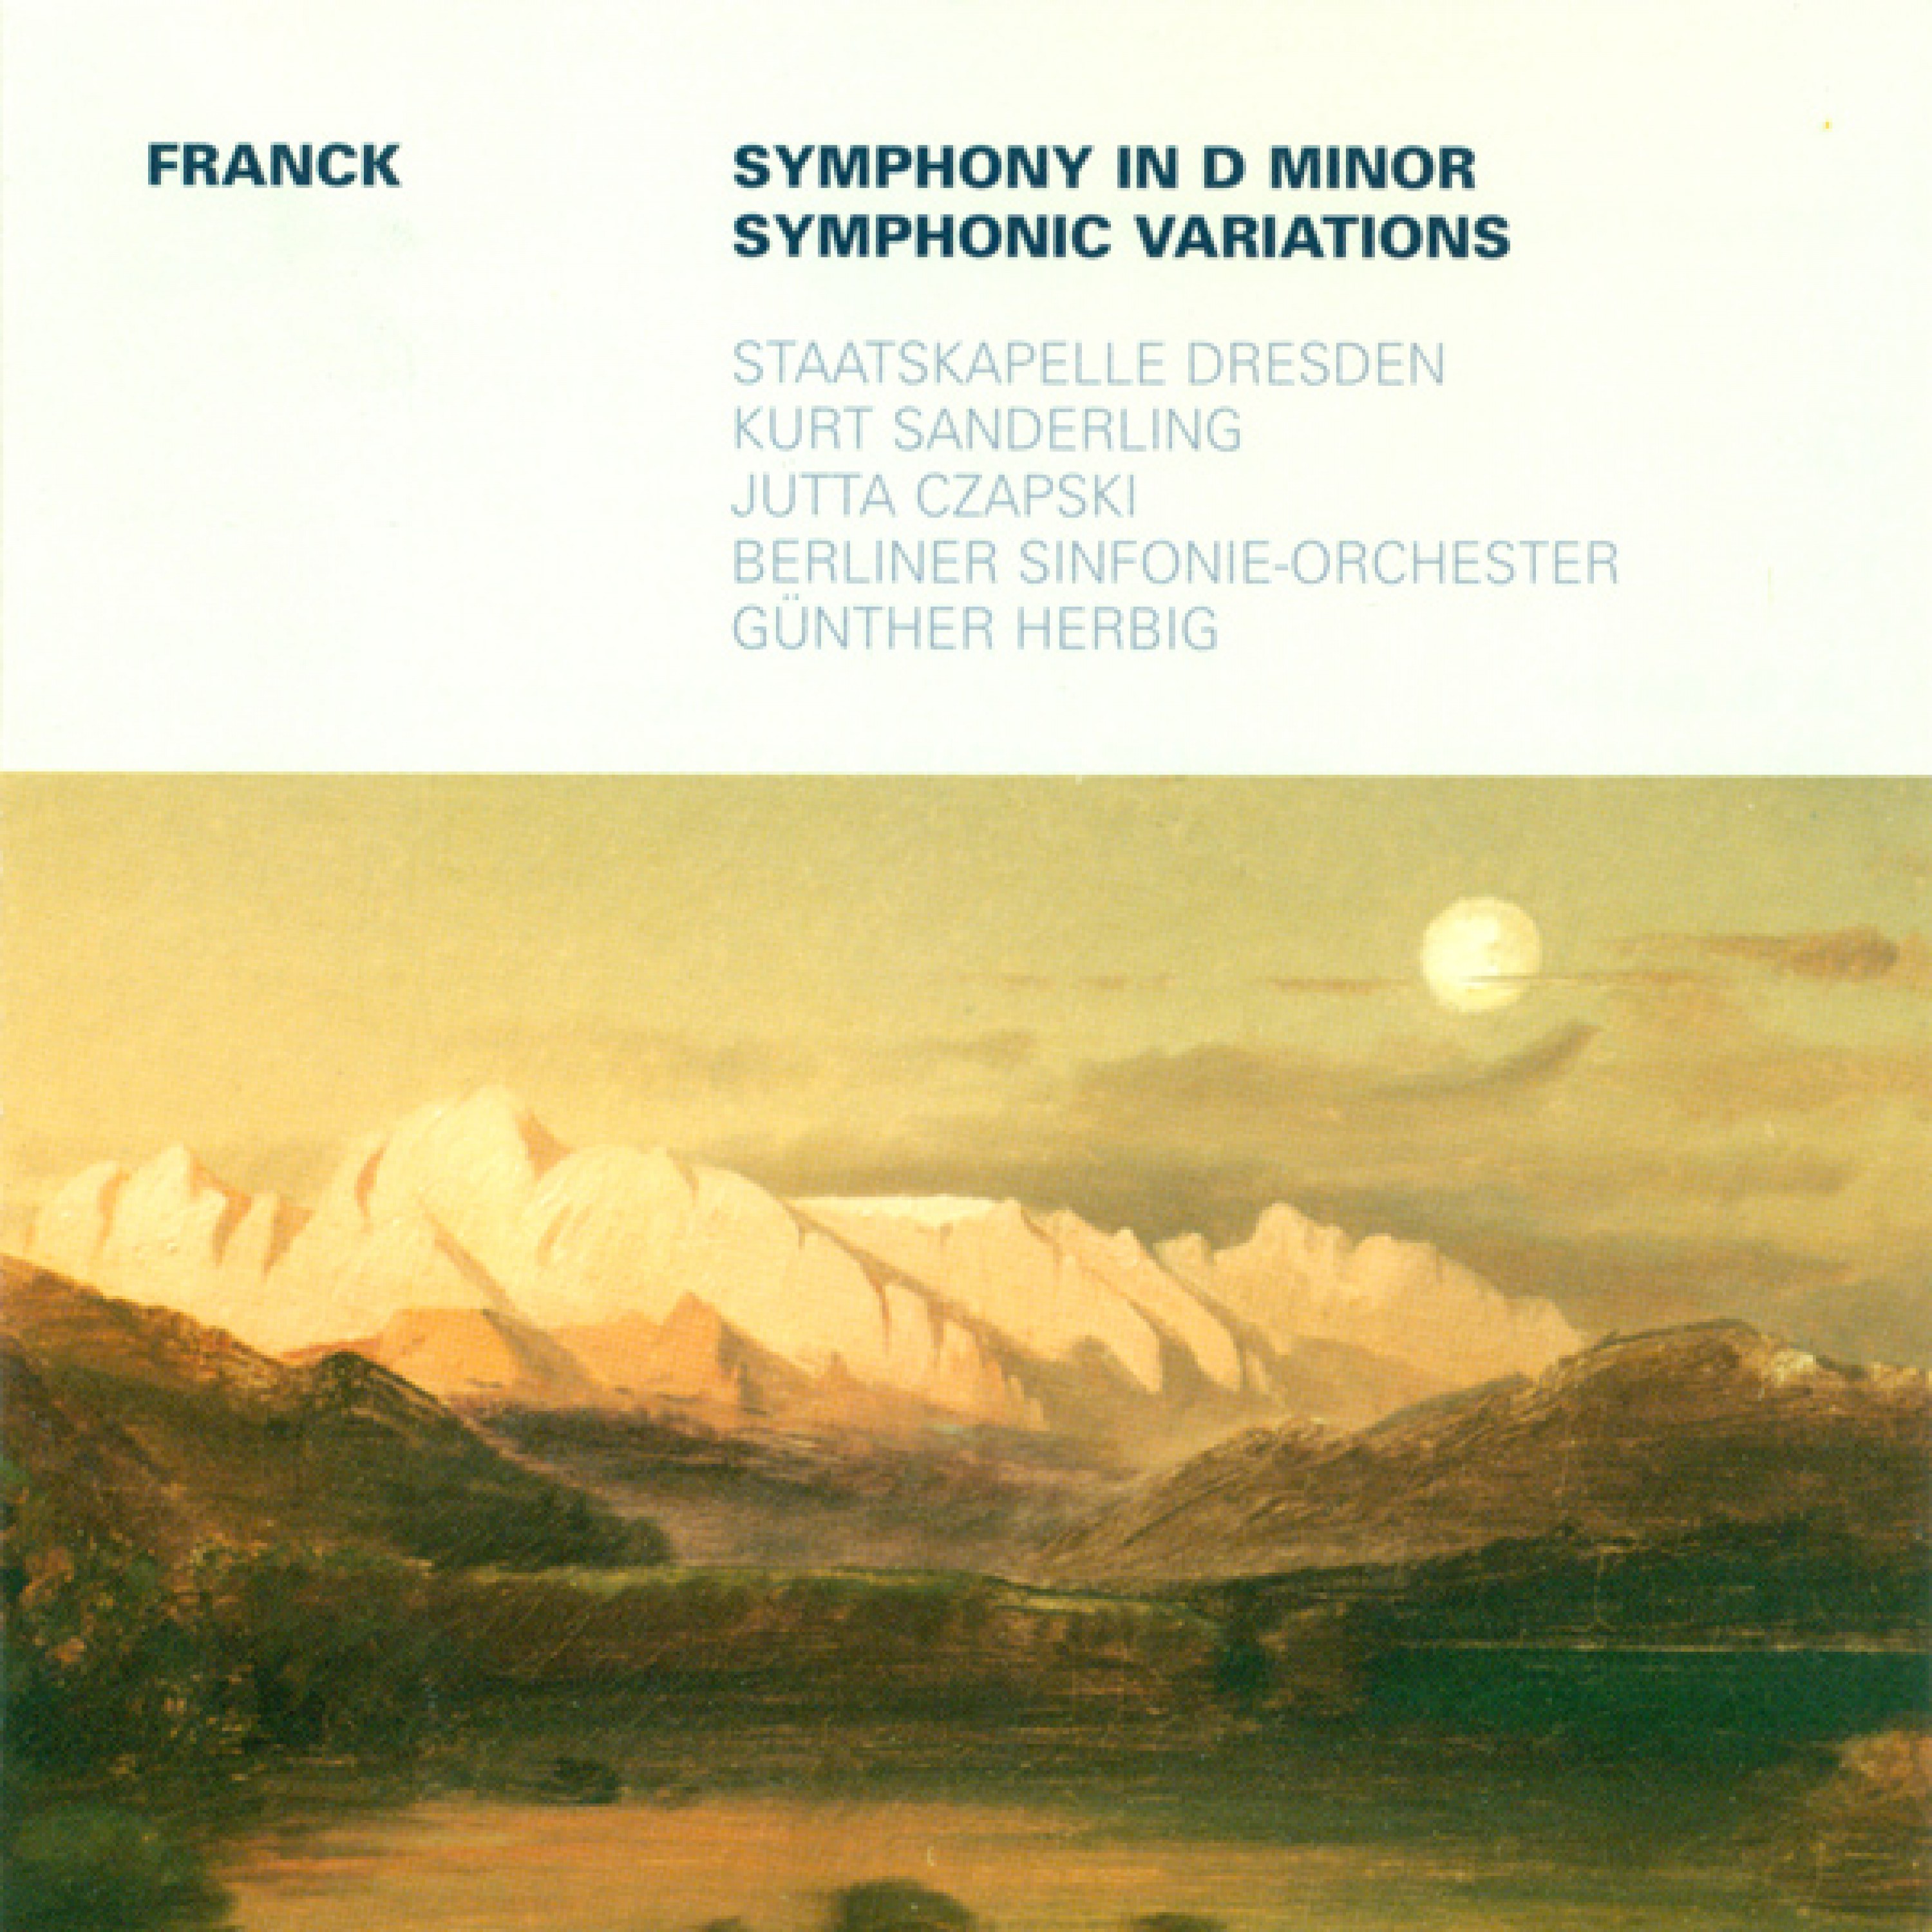 Franck: Symphony in D Minor & Symphonic Variations for Piano & Orchestra